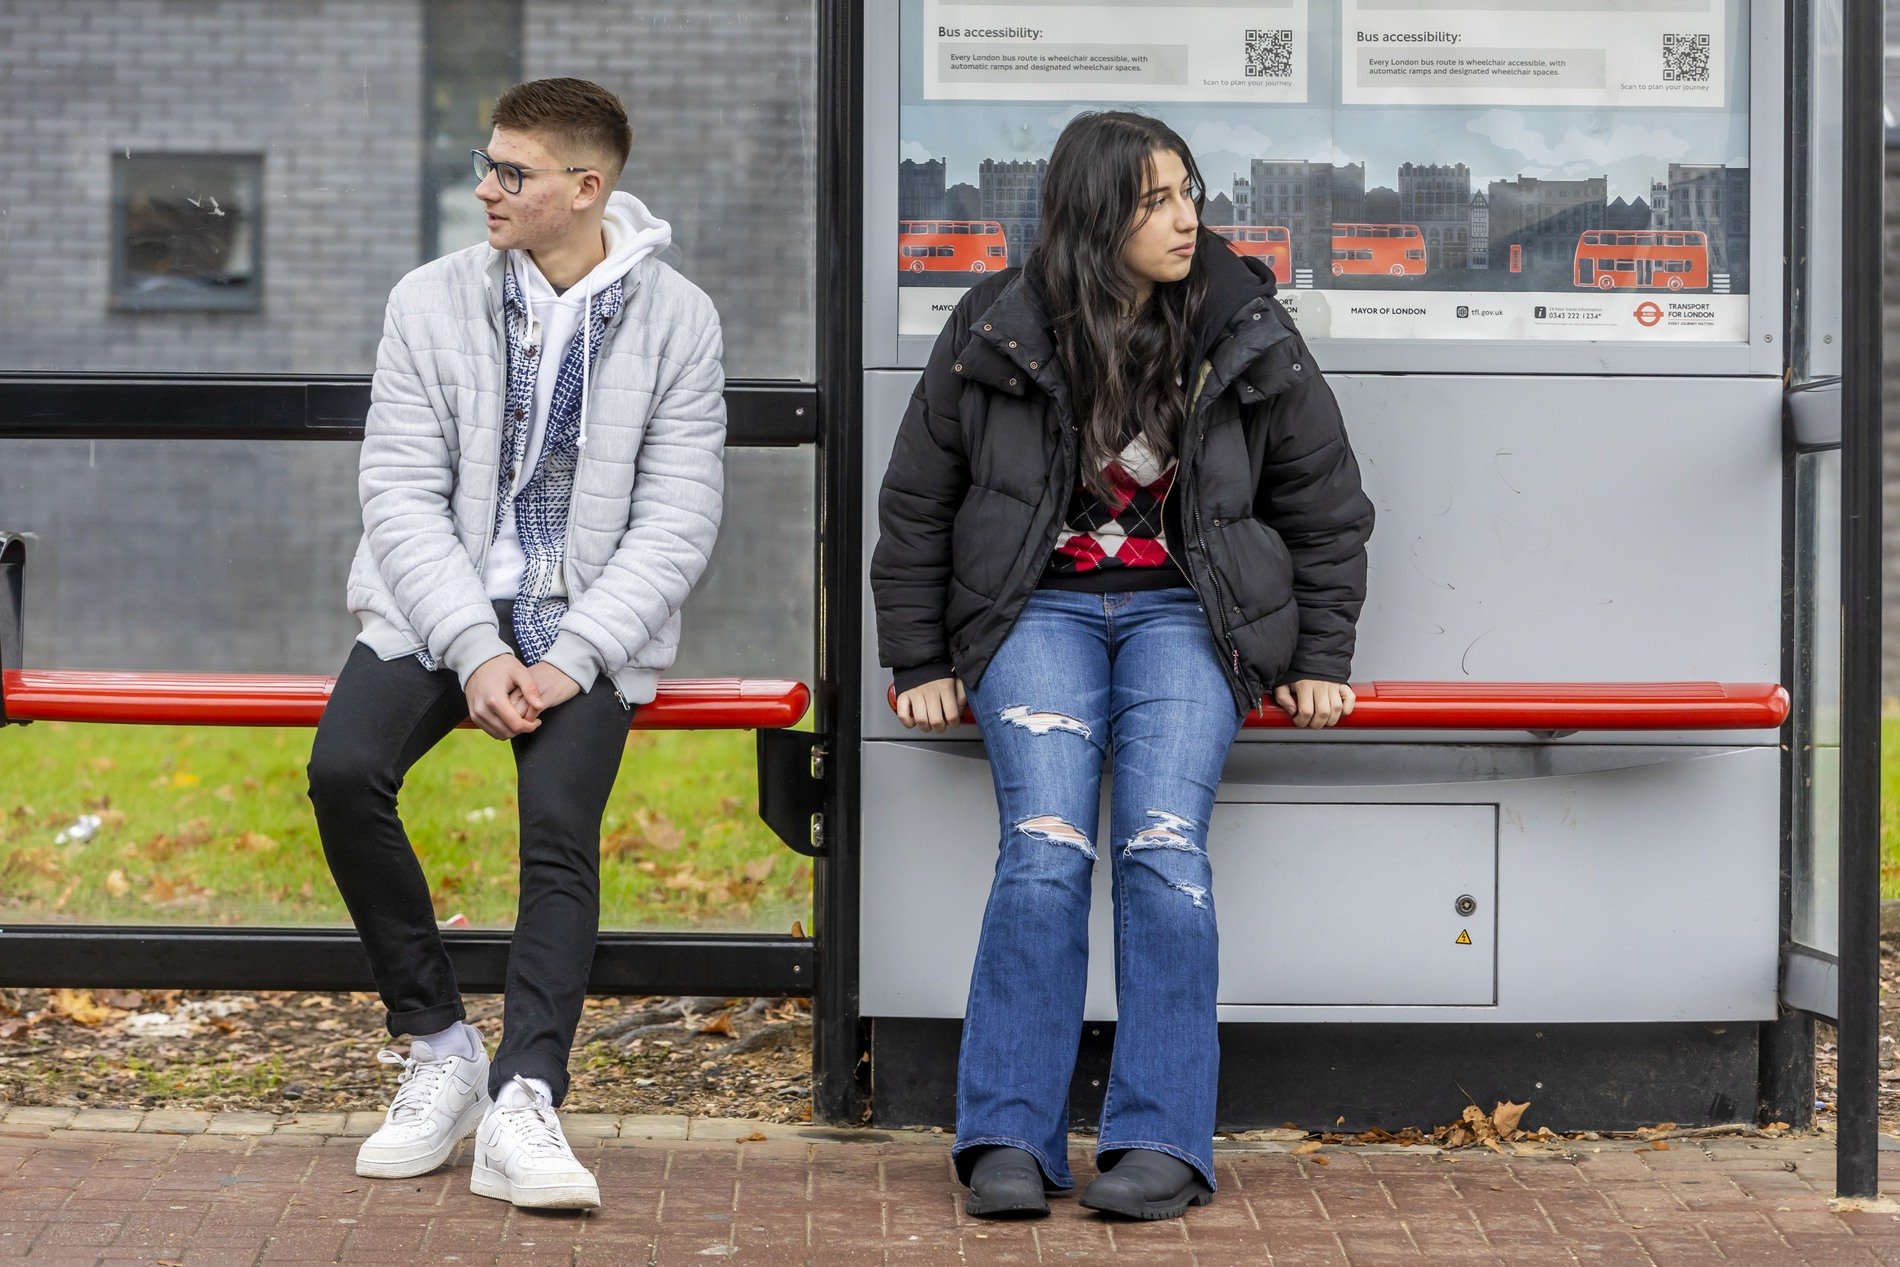 A couple of young people are sitting at a bus stop. They are thinking of flirting.